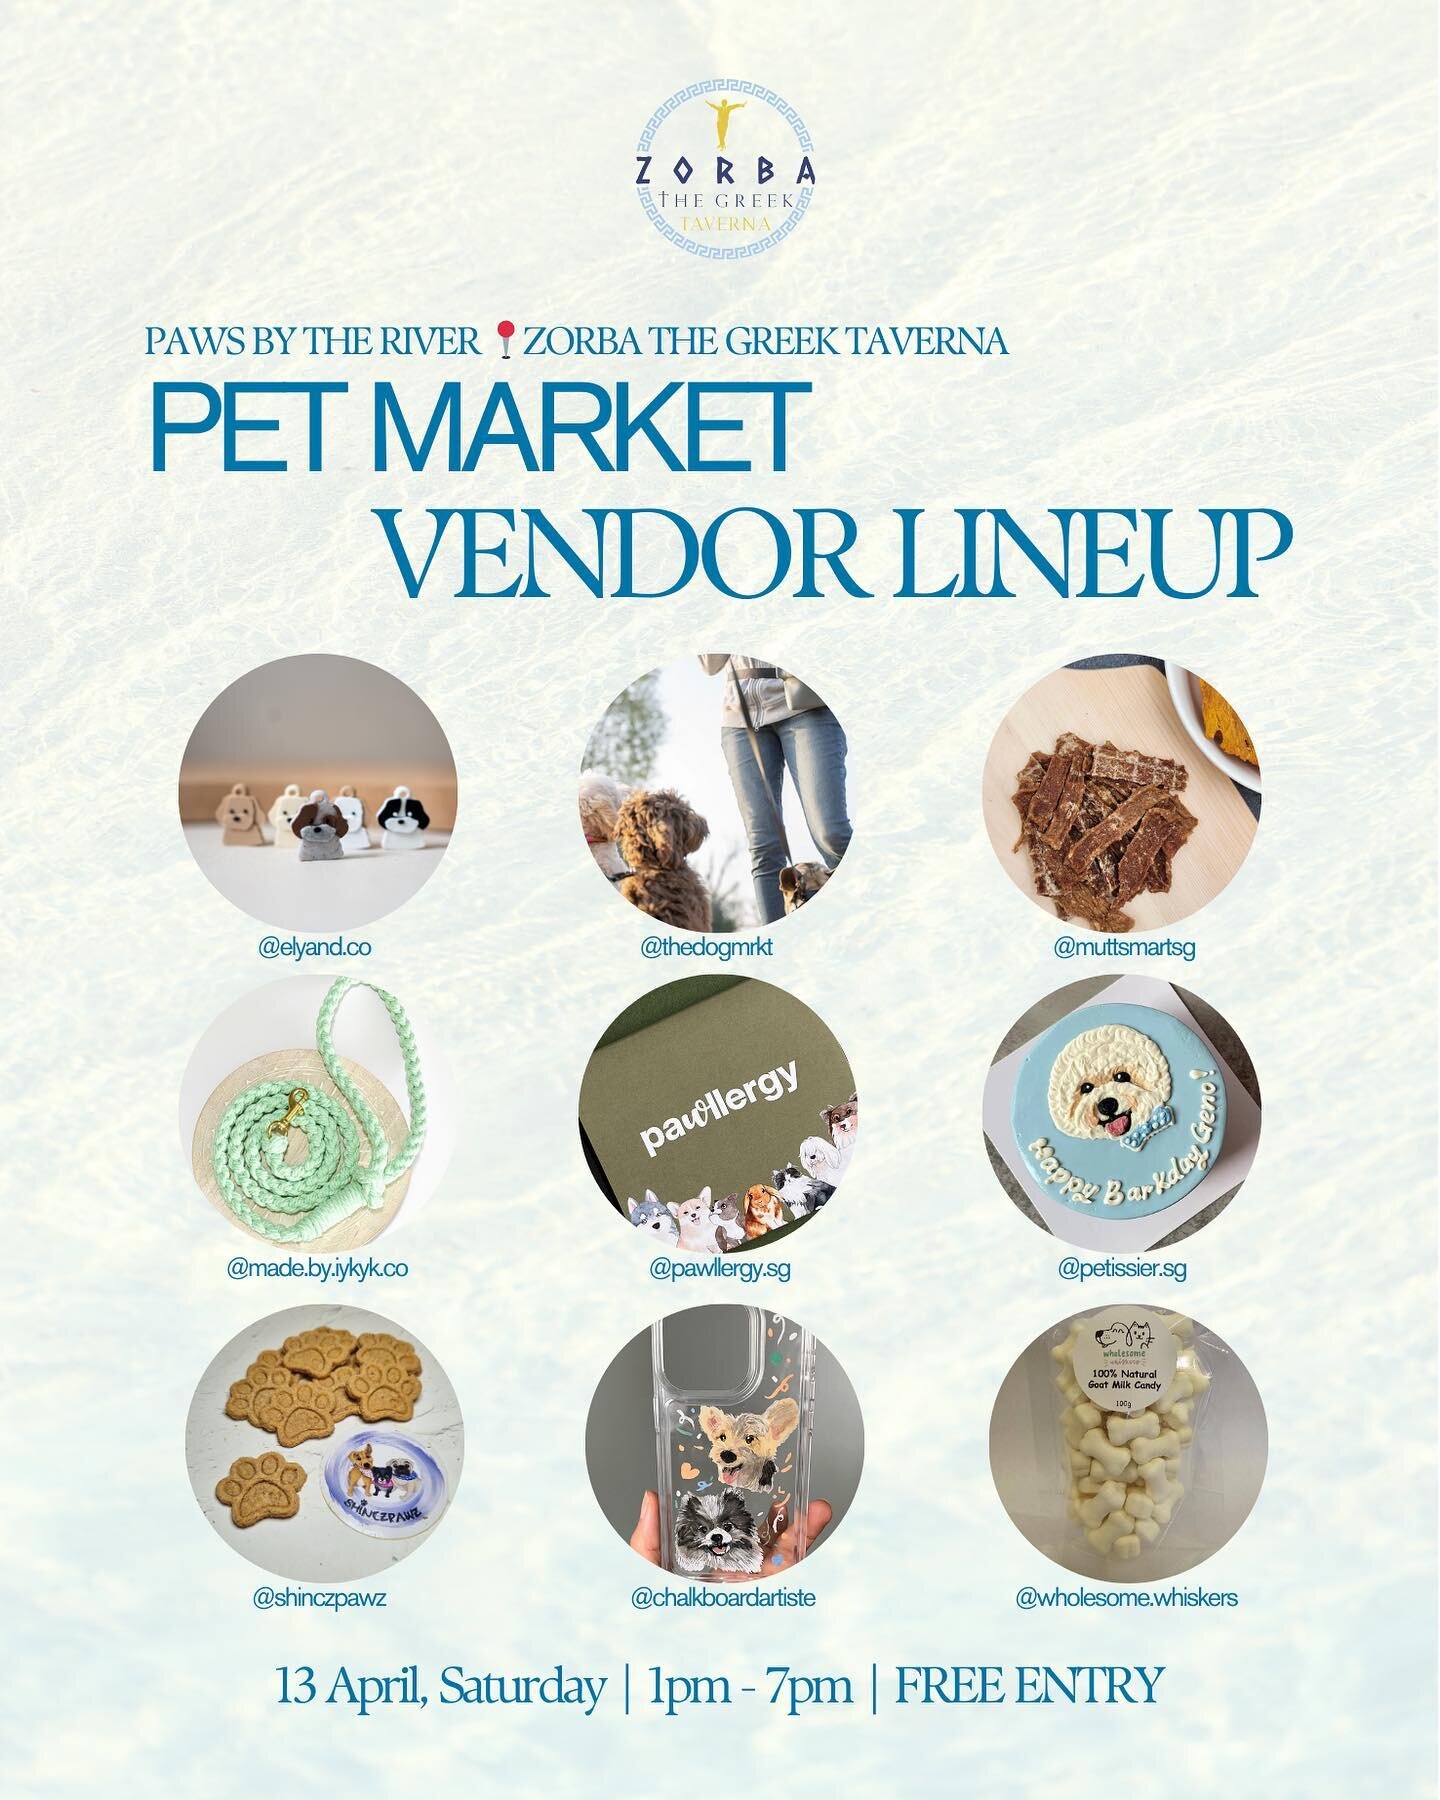 Here&rsquo;s the pet vendor lineup for 13 April, Saturday | Discover an array of unique pet treasures at each booth! From macrame pet wearables to TCM-inspired dog treats, each vendor brings something special for your furry friends.

🗓️ 13 April, Sa